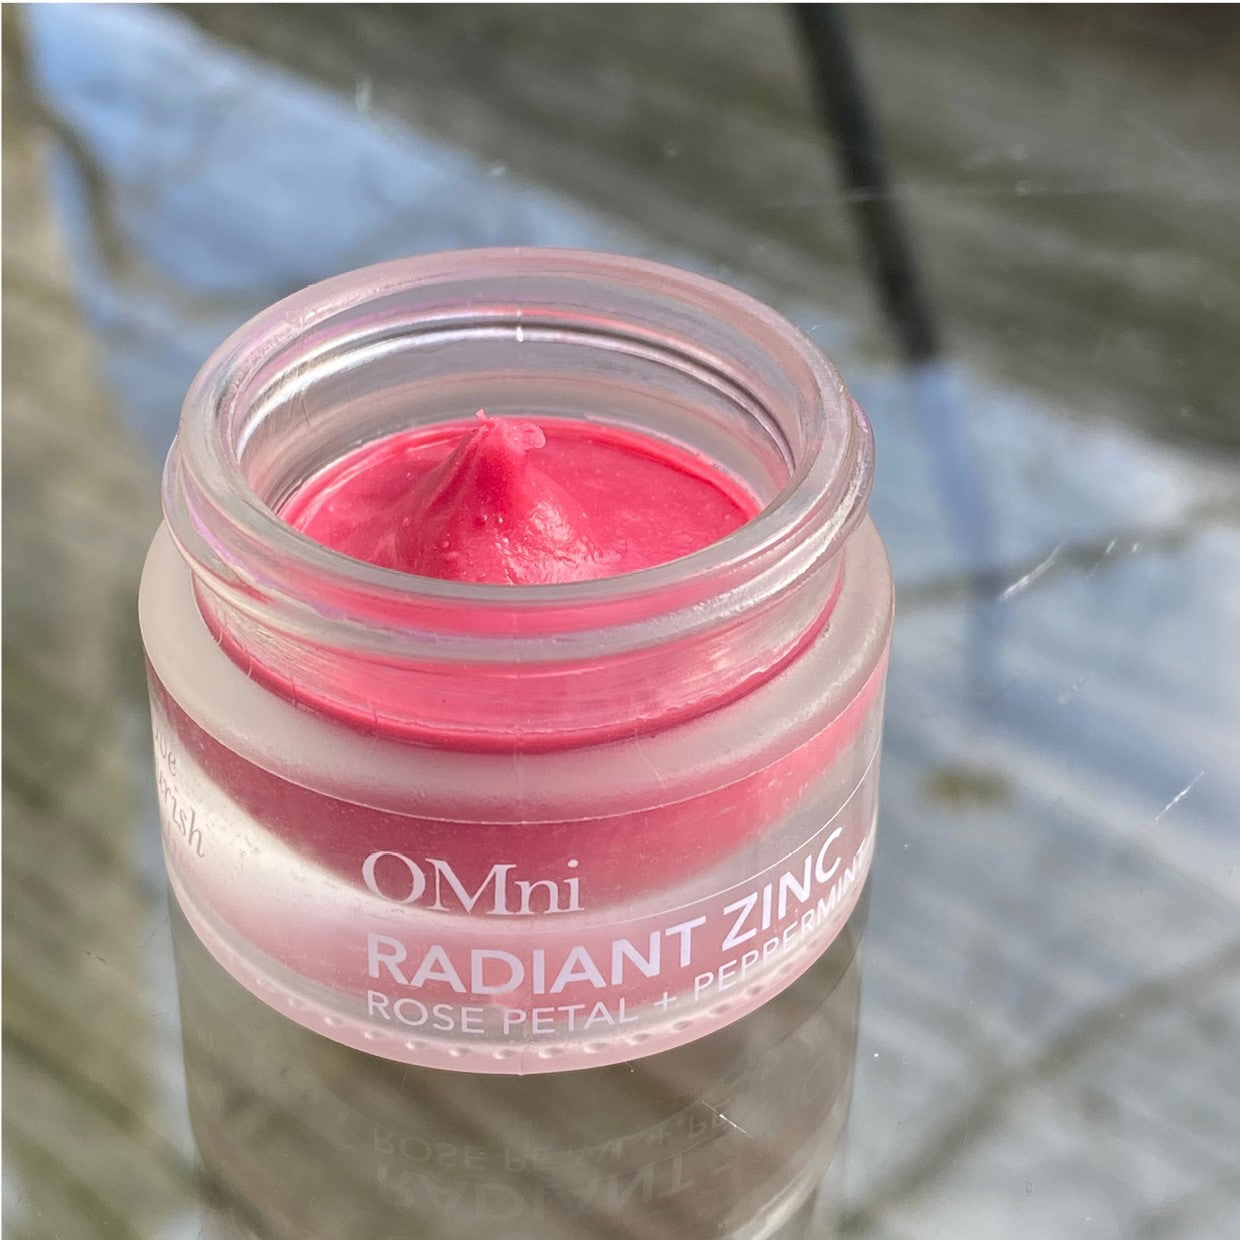 OMni Radiant Zinc Rose Petal natural multi-use balm for dry lips and skin, and blush on cheeks #2